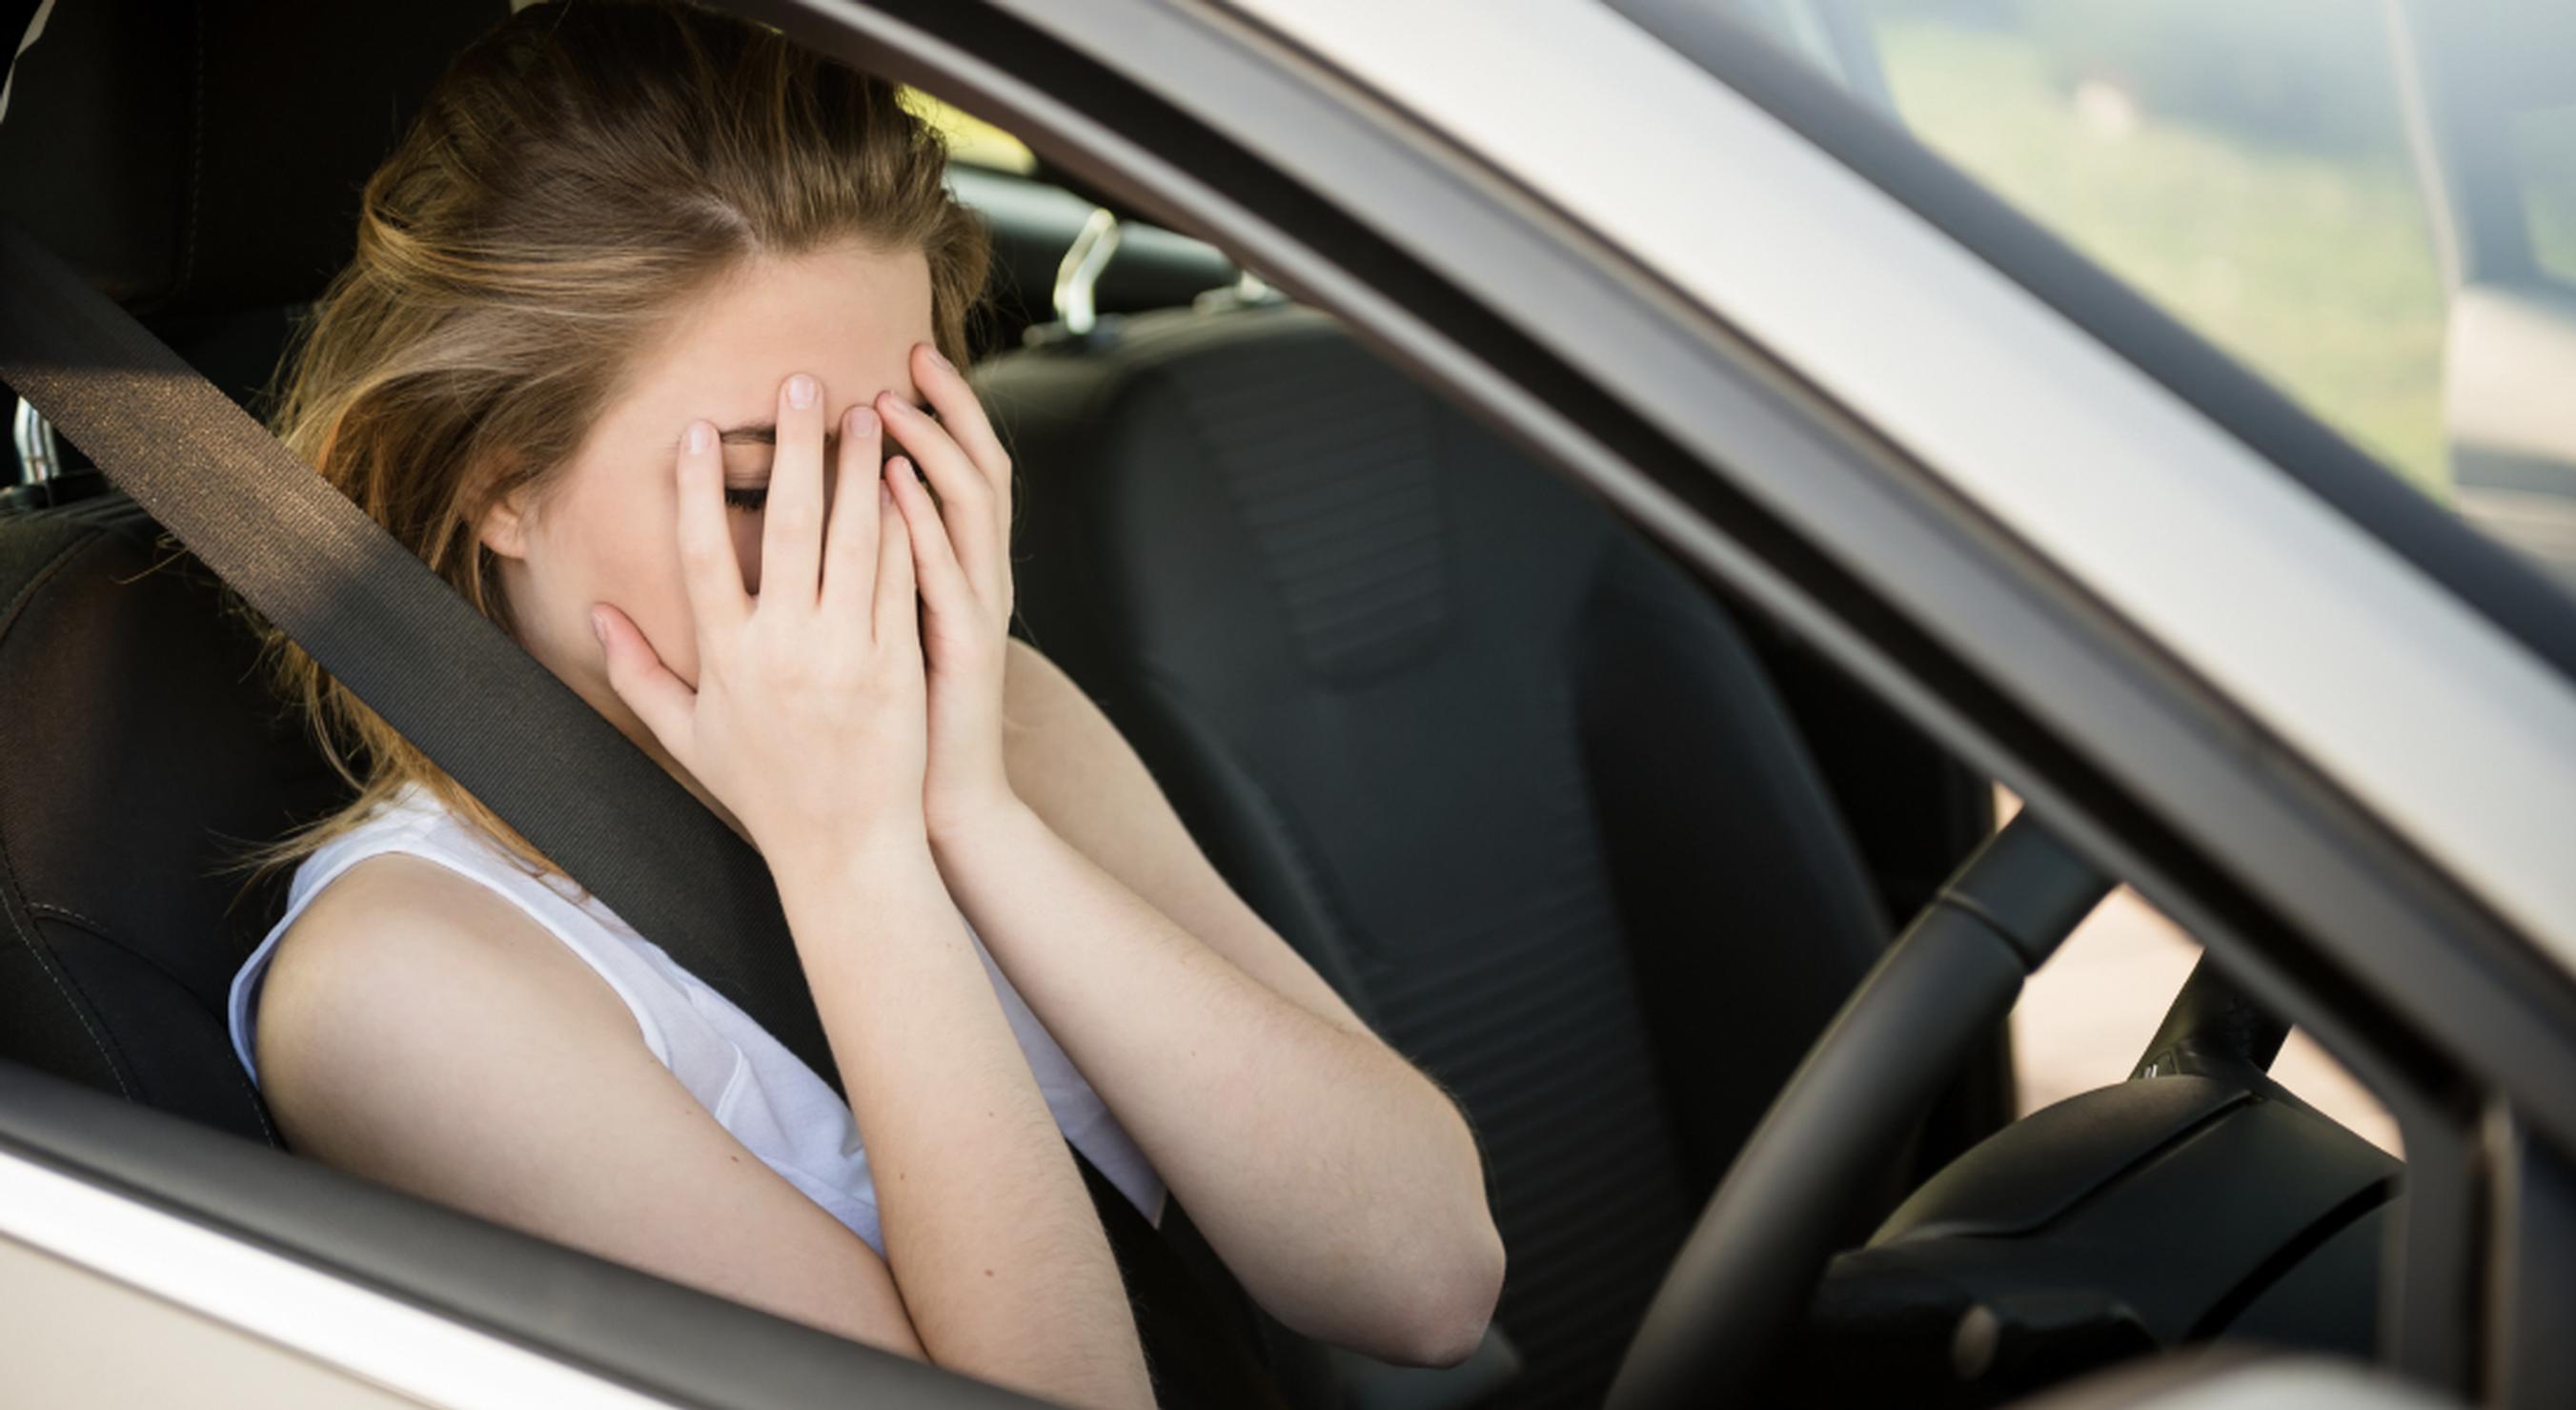 60% of drivers admit that they are worried about getting behind the wheel